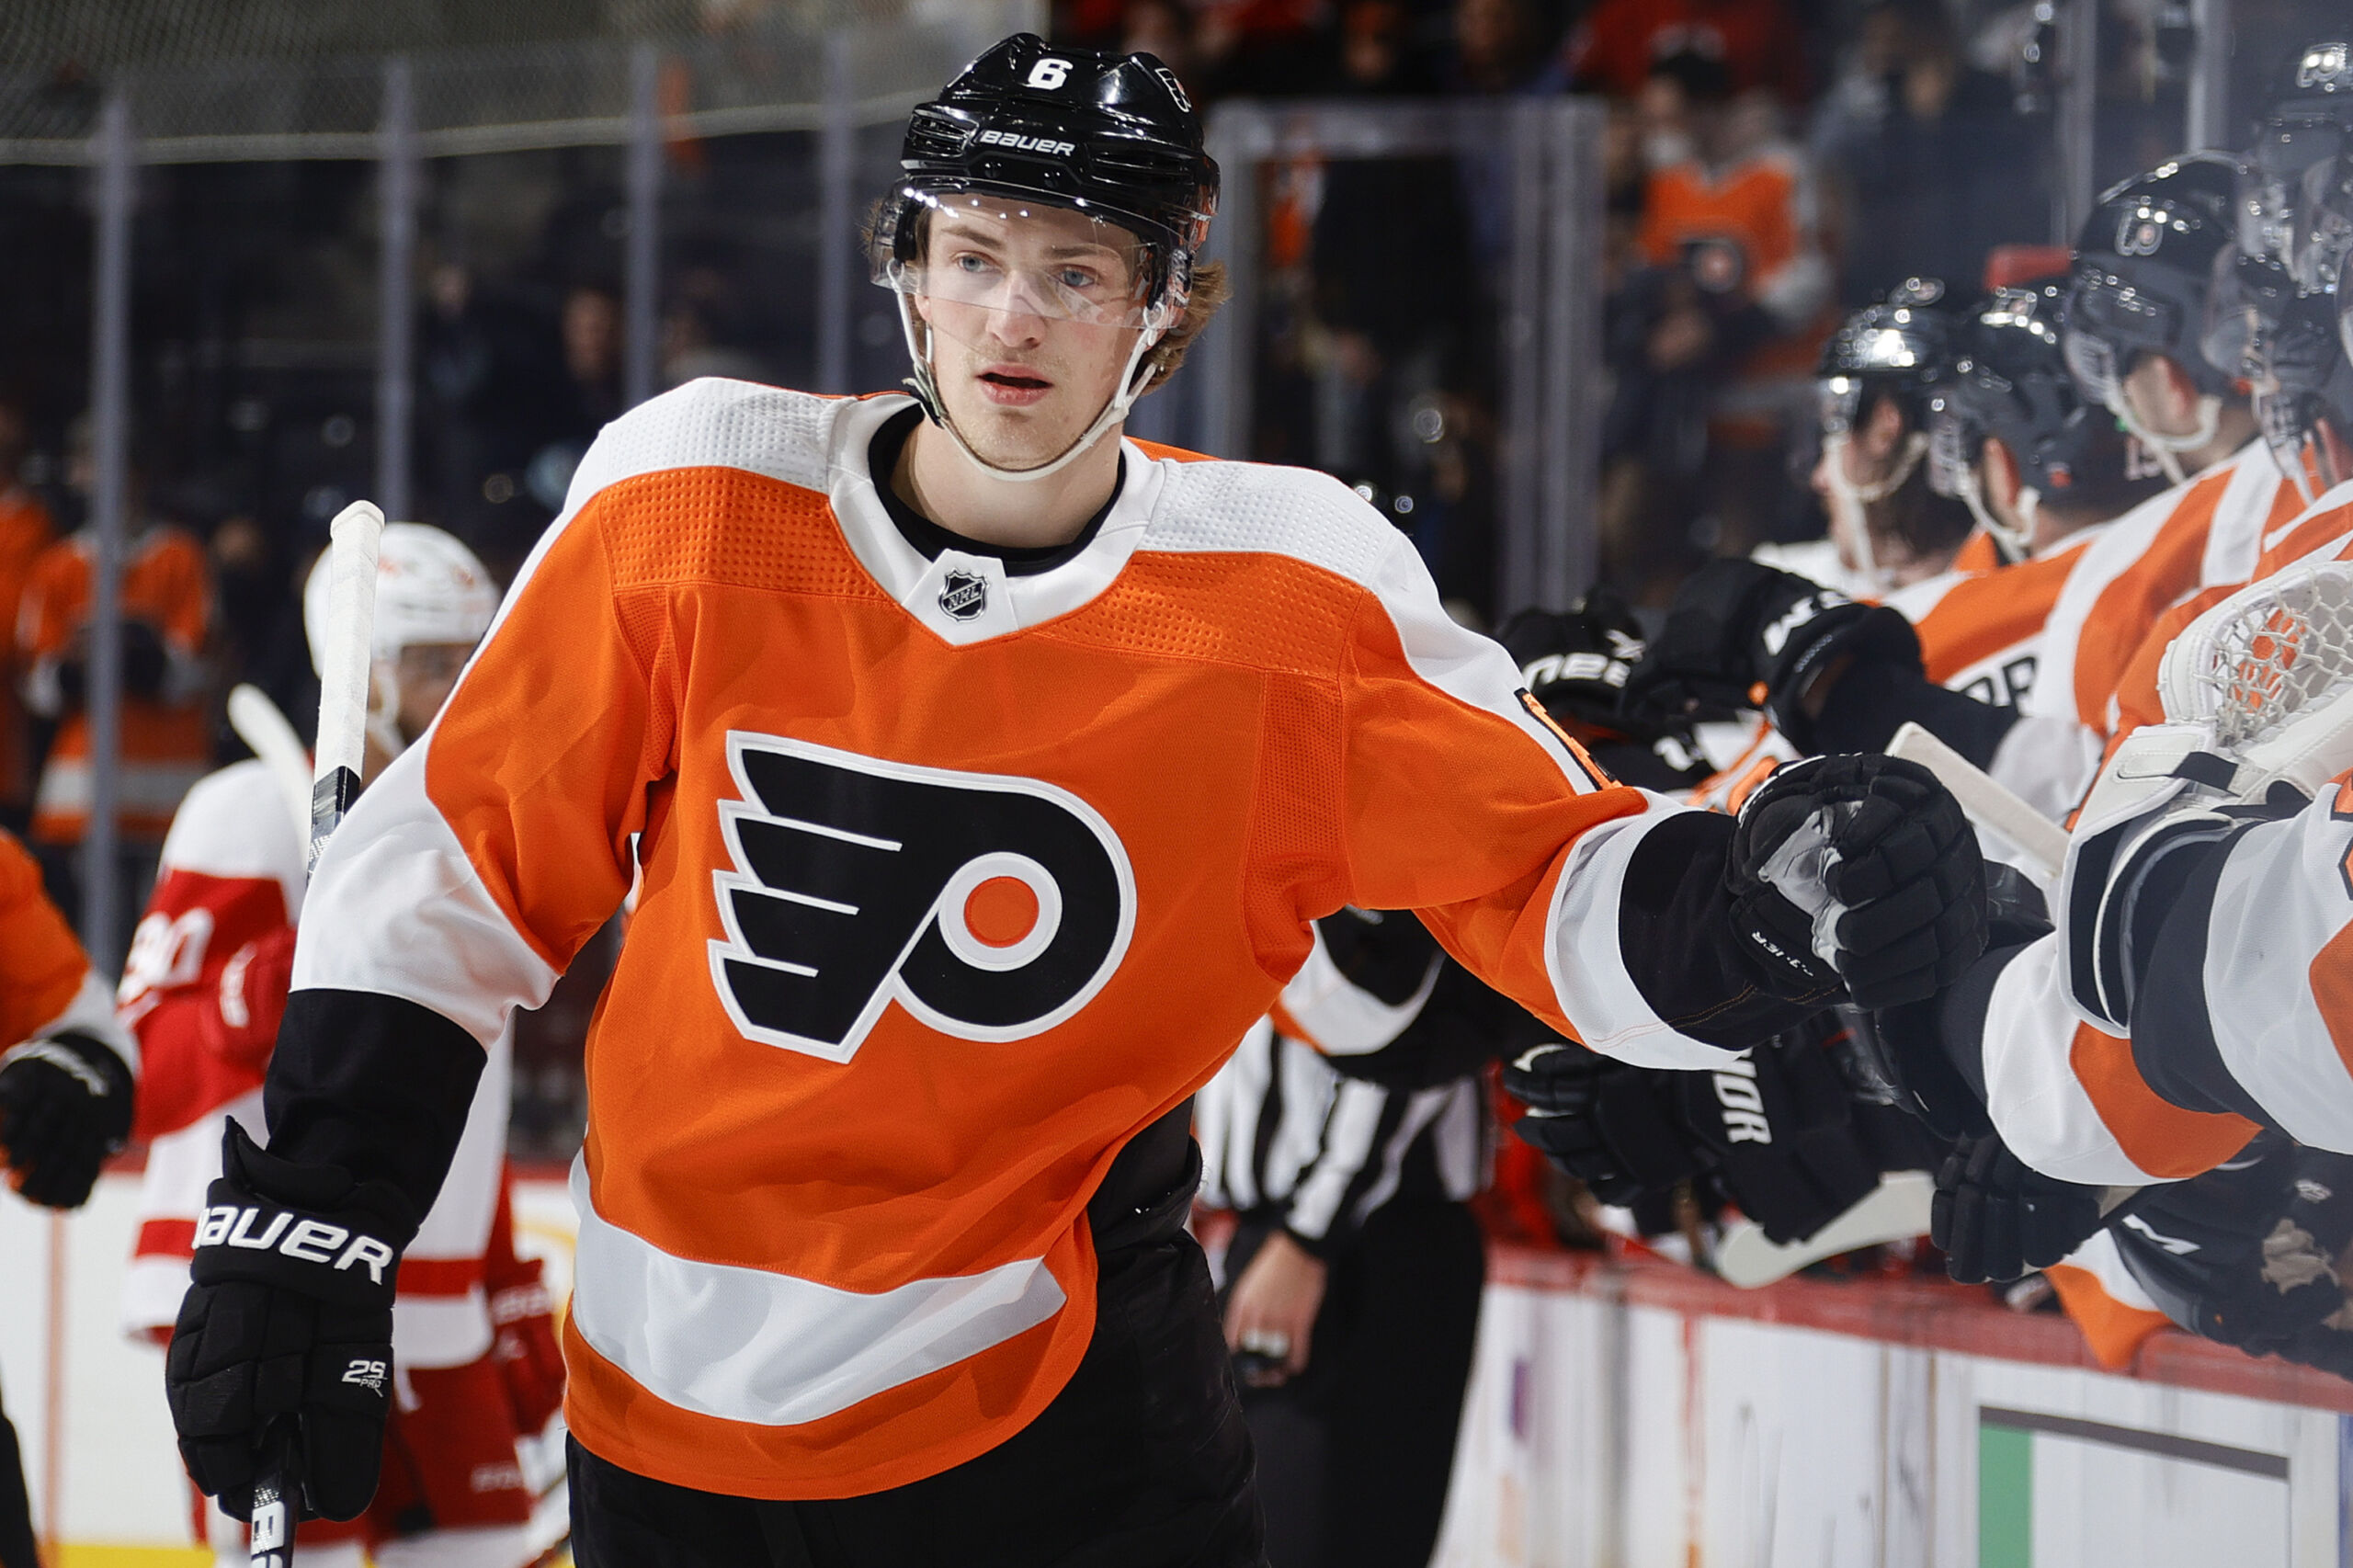 Flyers to play without Konecny and Laughton, Hayes on wing as